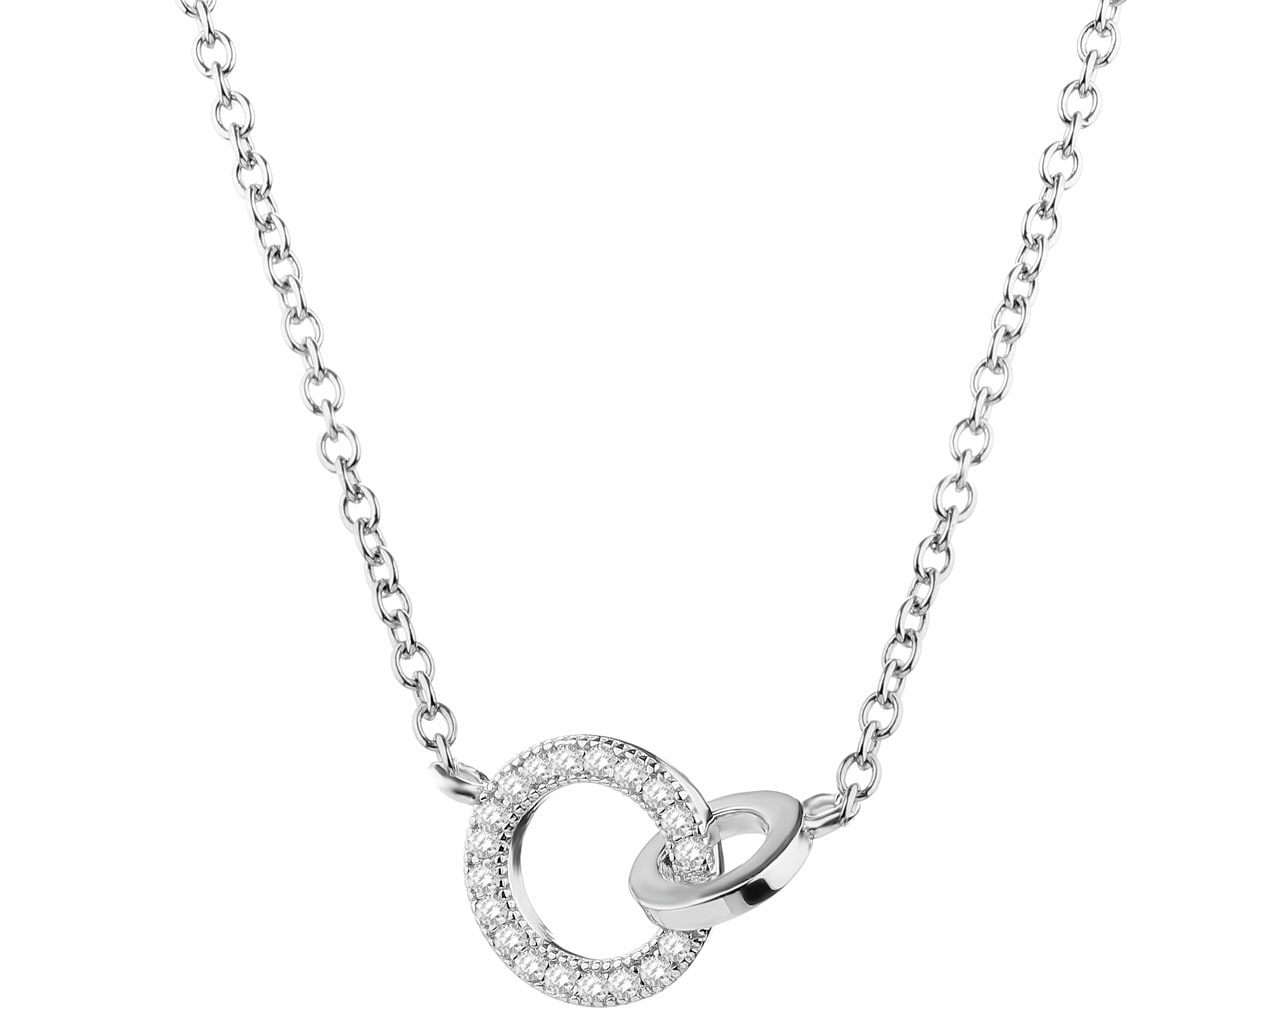 Rhodium Plated Silver Necklace with Cubic Zirconia.